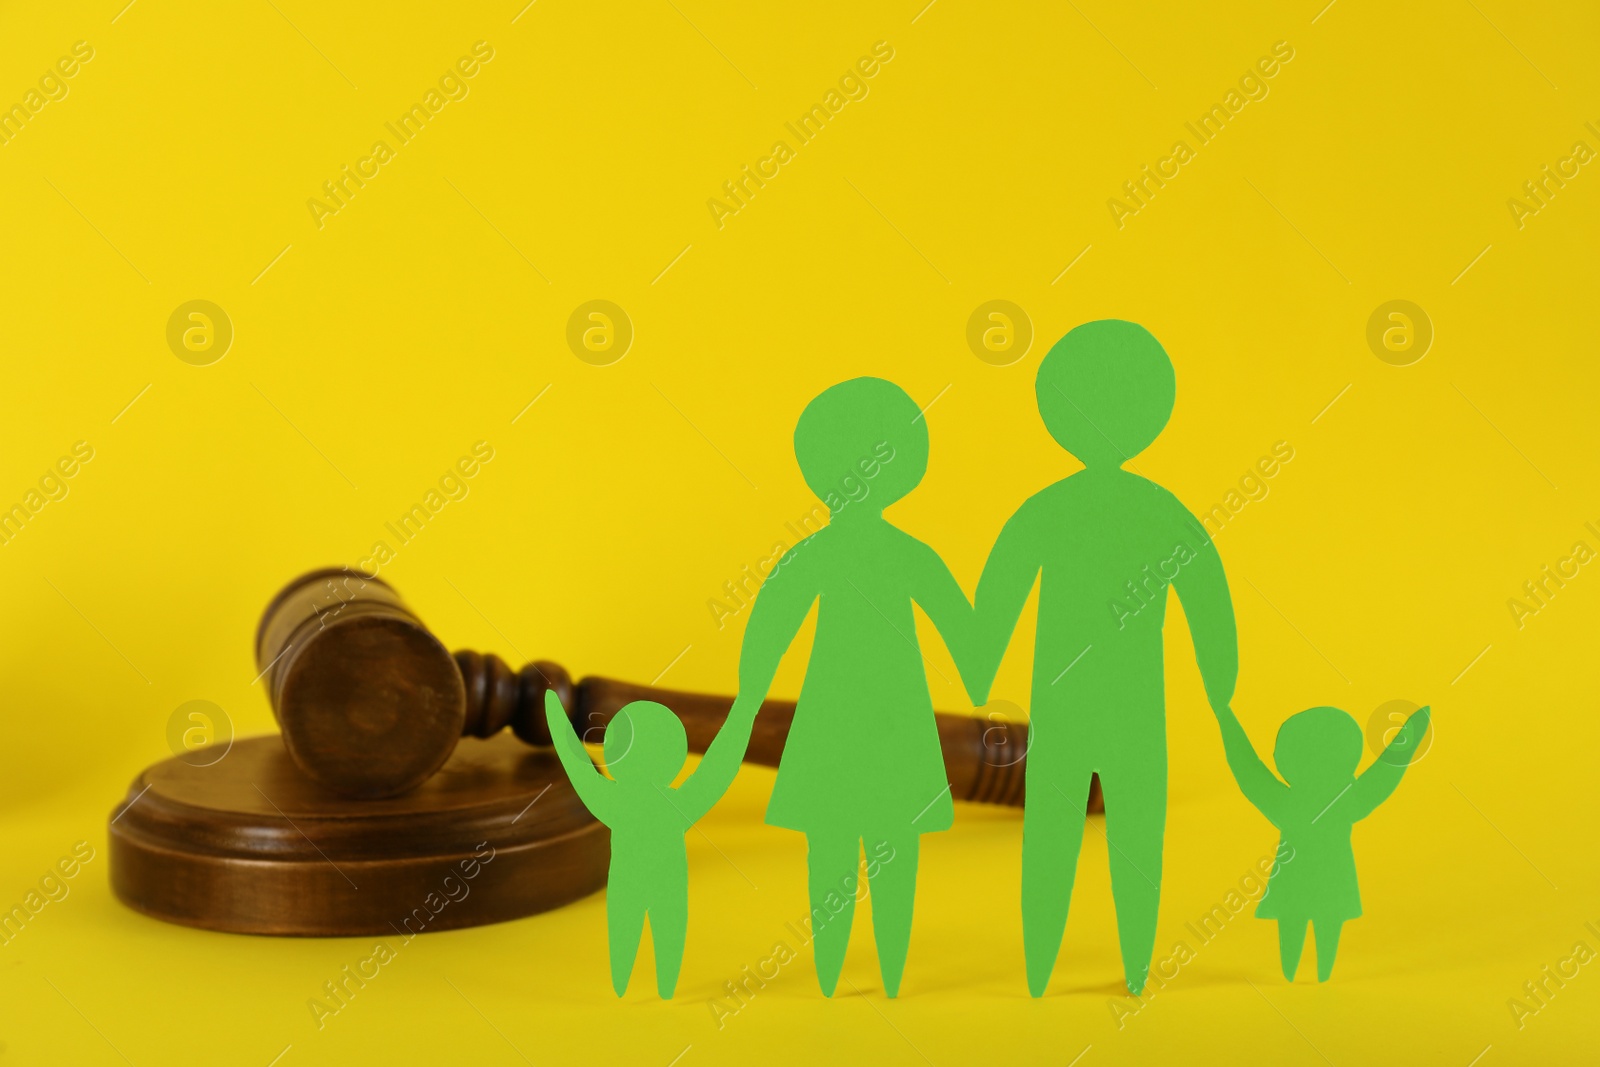 Photo of Paper family figure and wooden gavel on yellow background. Child adoption concept